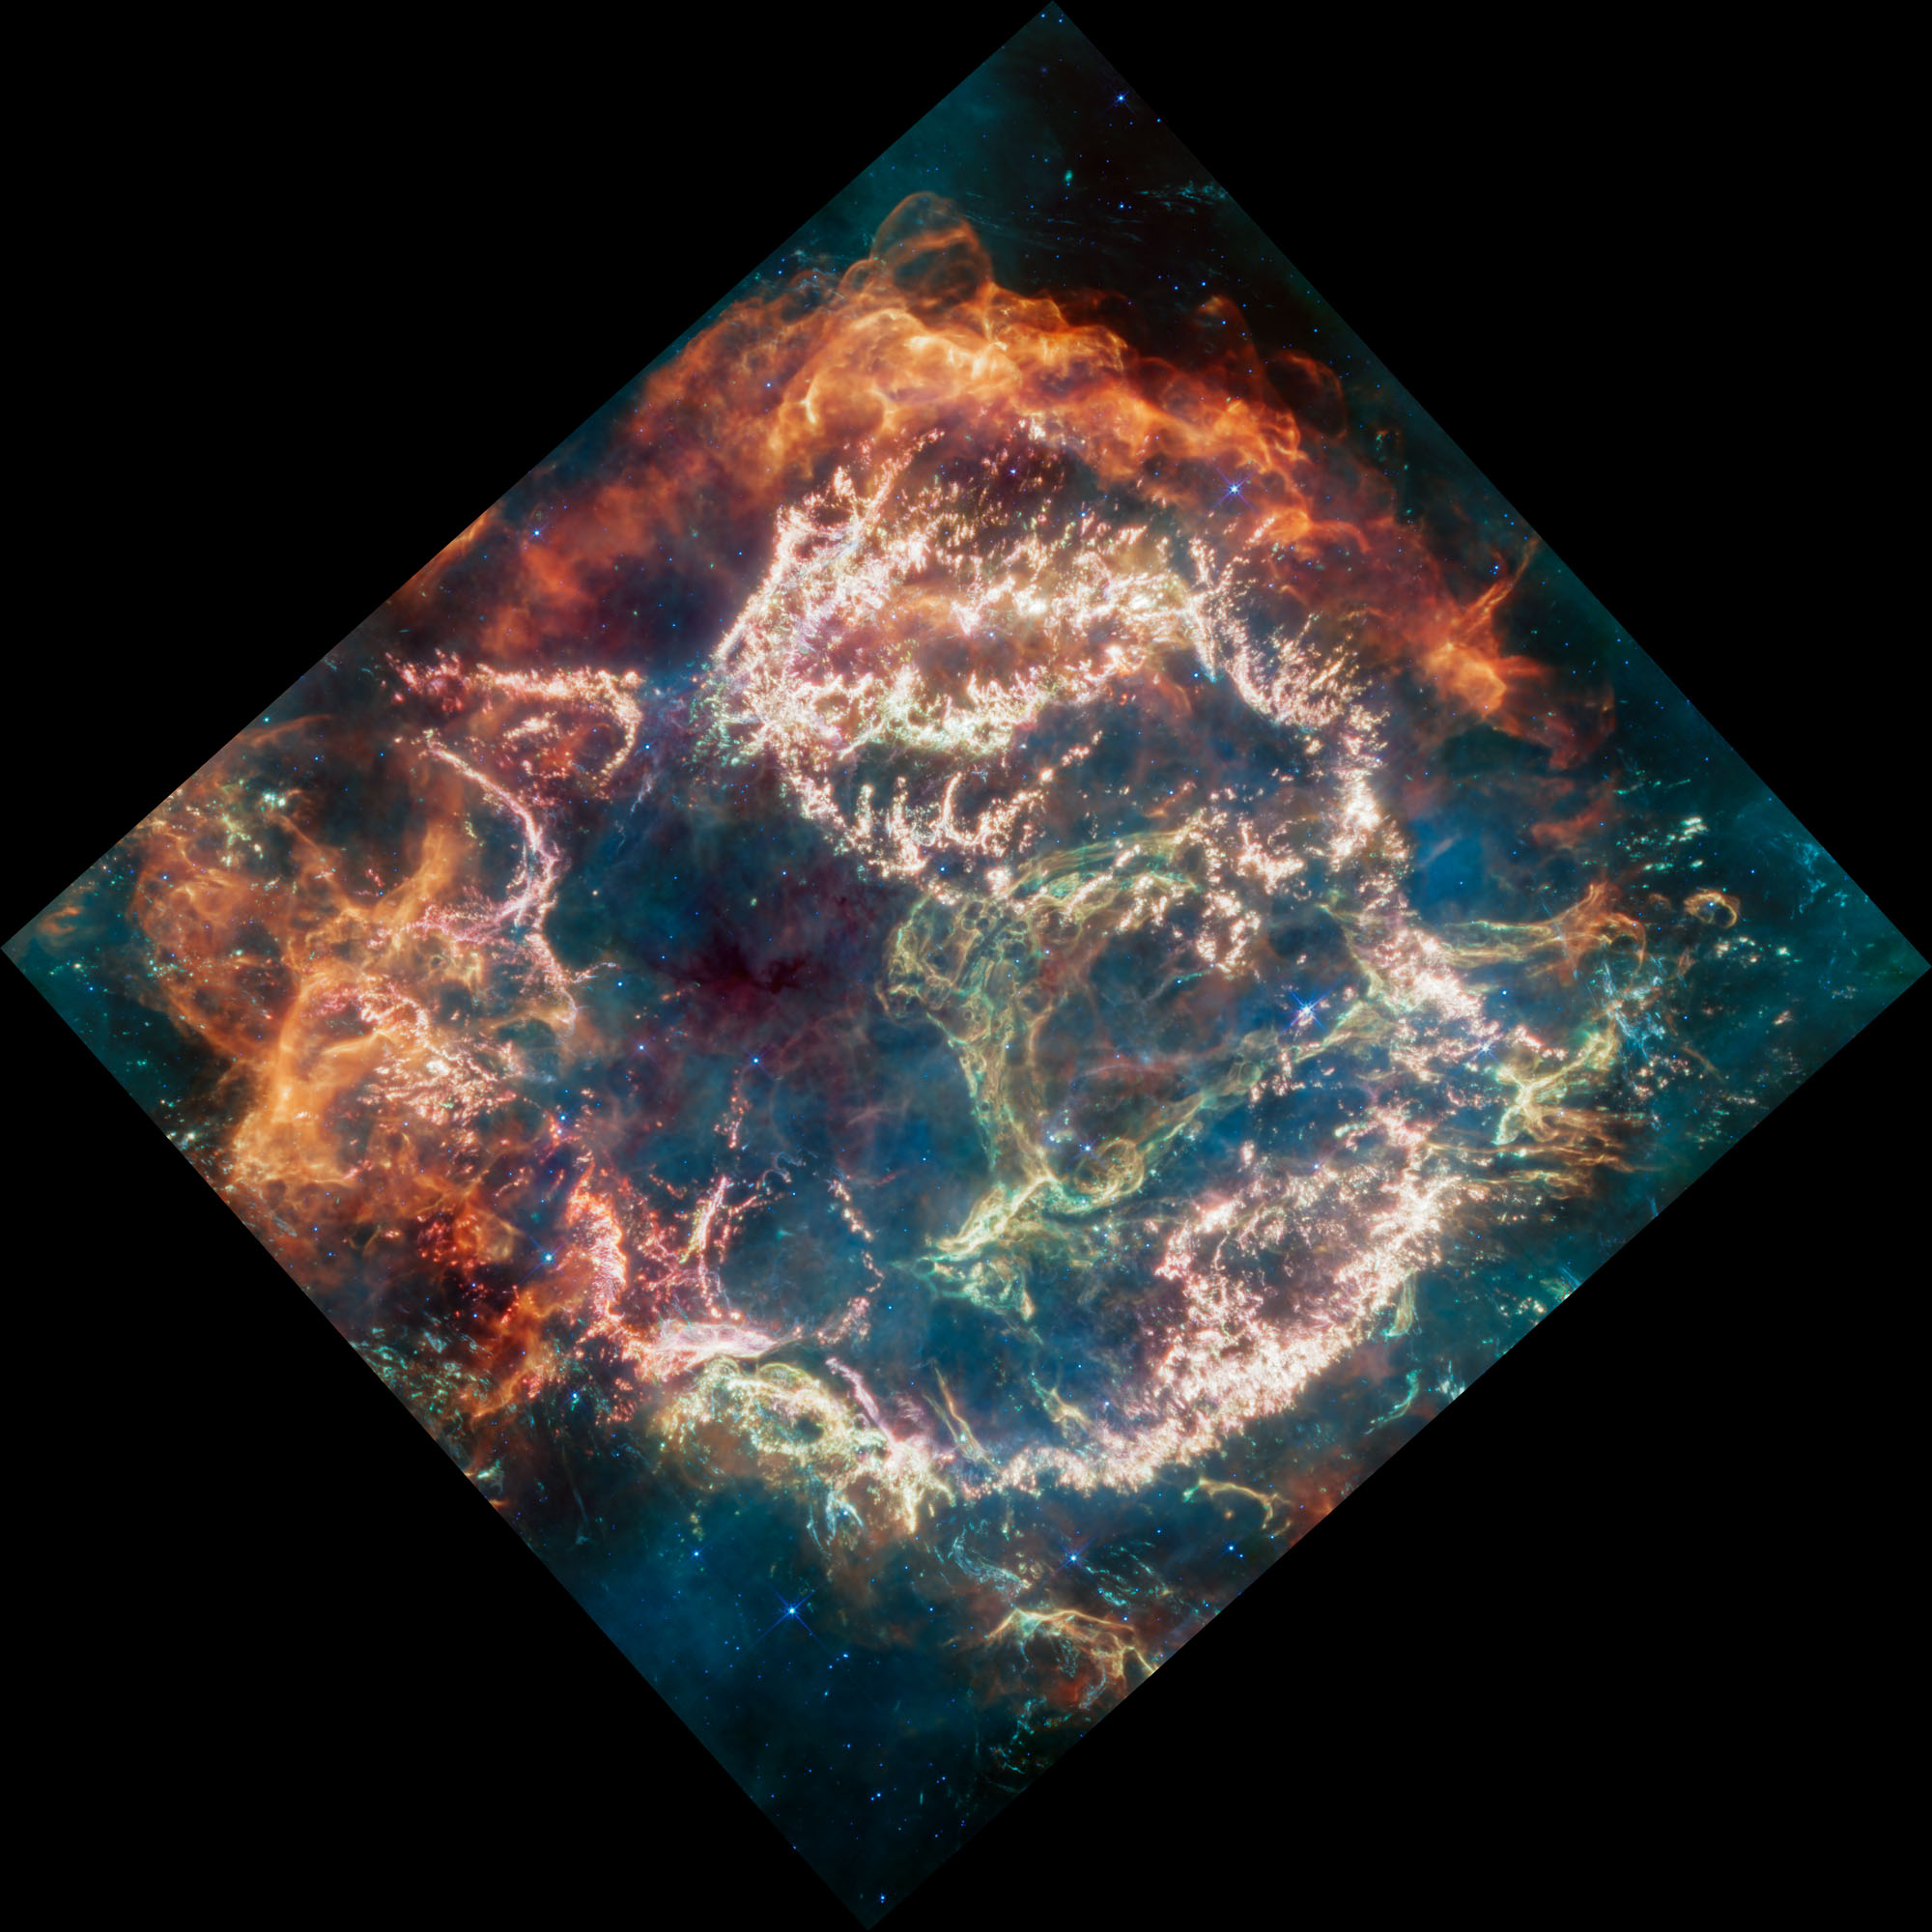 A roughly square image is rotated clockwise about 45 degrees, with solid black in the corners on the top left, top right, bottom left, and bottom right. Within the image is a circular-shaped nebula with complex structure. On the circle’s exterior, particularly at the top and left of the image, lie curtains of material glowing orange. Interior to this outer shell lies a ring of mottled filaments of bright pink studded with clumps and knots. At center right, a greenish loop extends from the right side of the ring into the central cavity. Translucent wisps of blue, green, and red appear throughout the image.